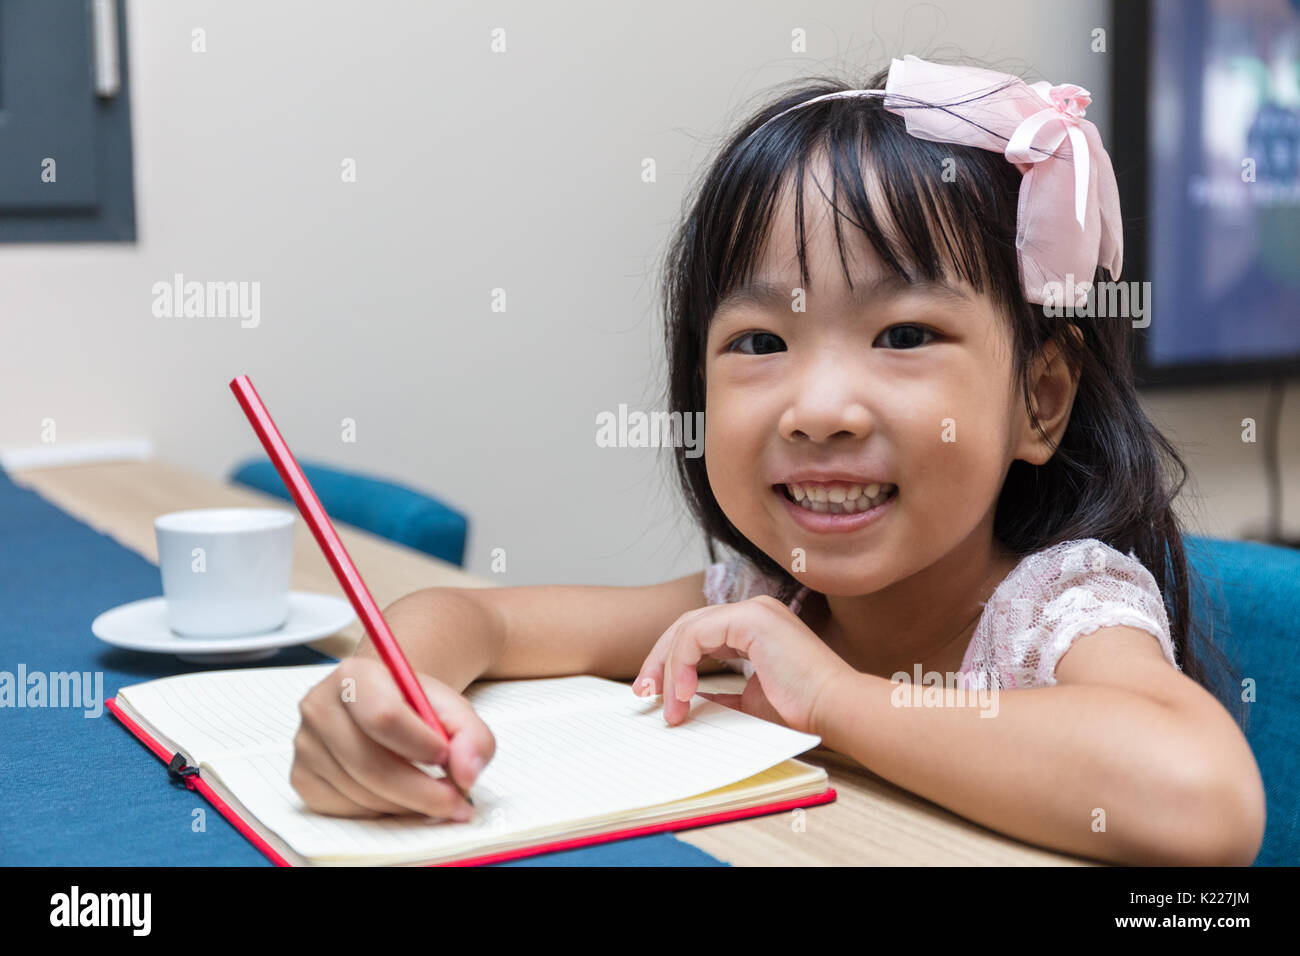 Kids Drawing and Pencils stock photo. Image of happy - 53657220